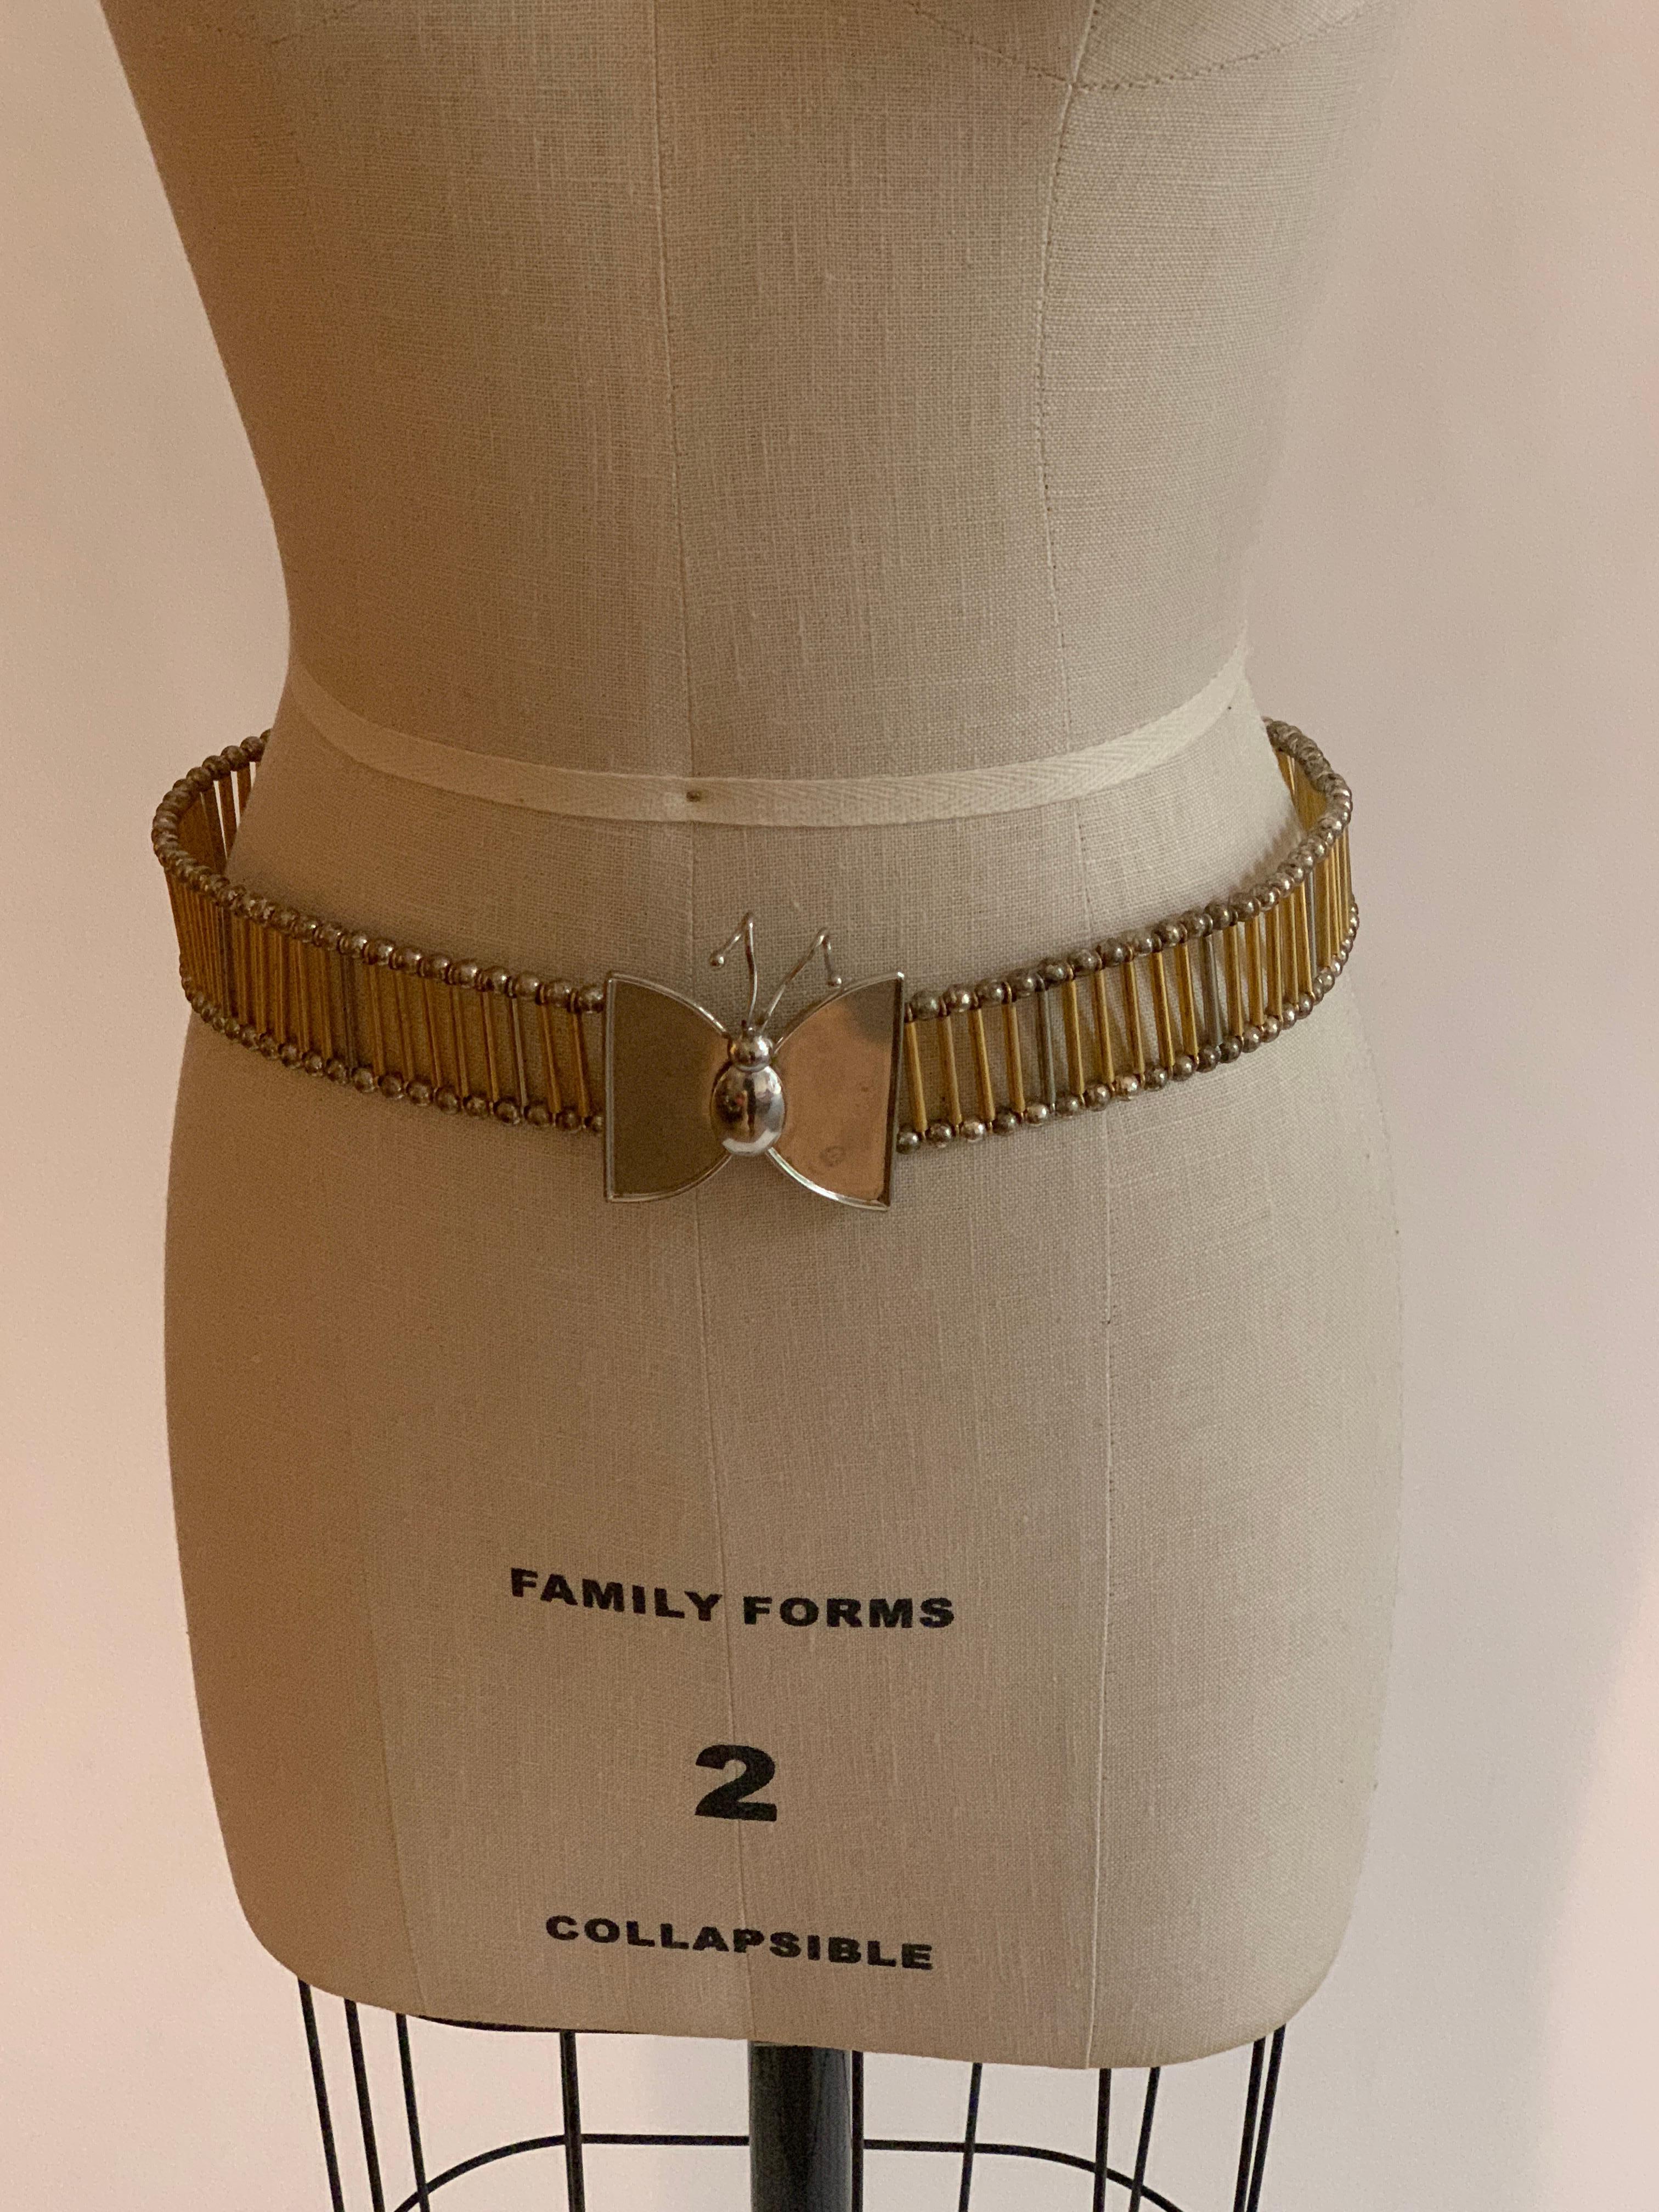 William De Lillo metal butterfly belt in silver and gold tones. Long silver and gold tone metal beads connect  silver ball pieces at edges. Fastens with two hooks at back of butterfly.

Stamped 'de Lillo' at butterfly back.

Adjustable up to 30